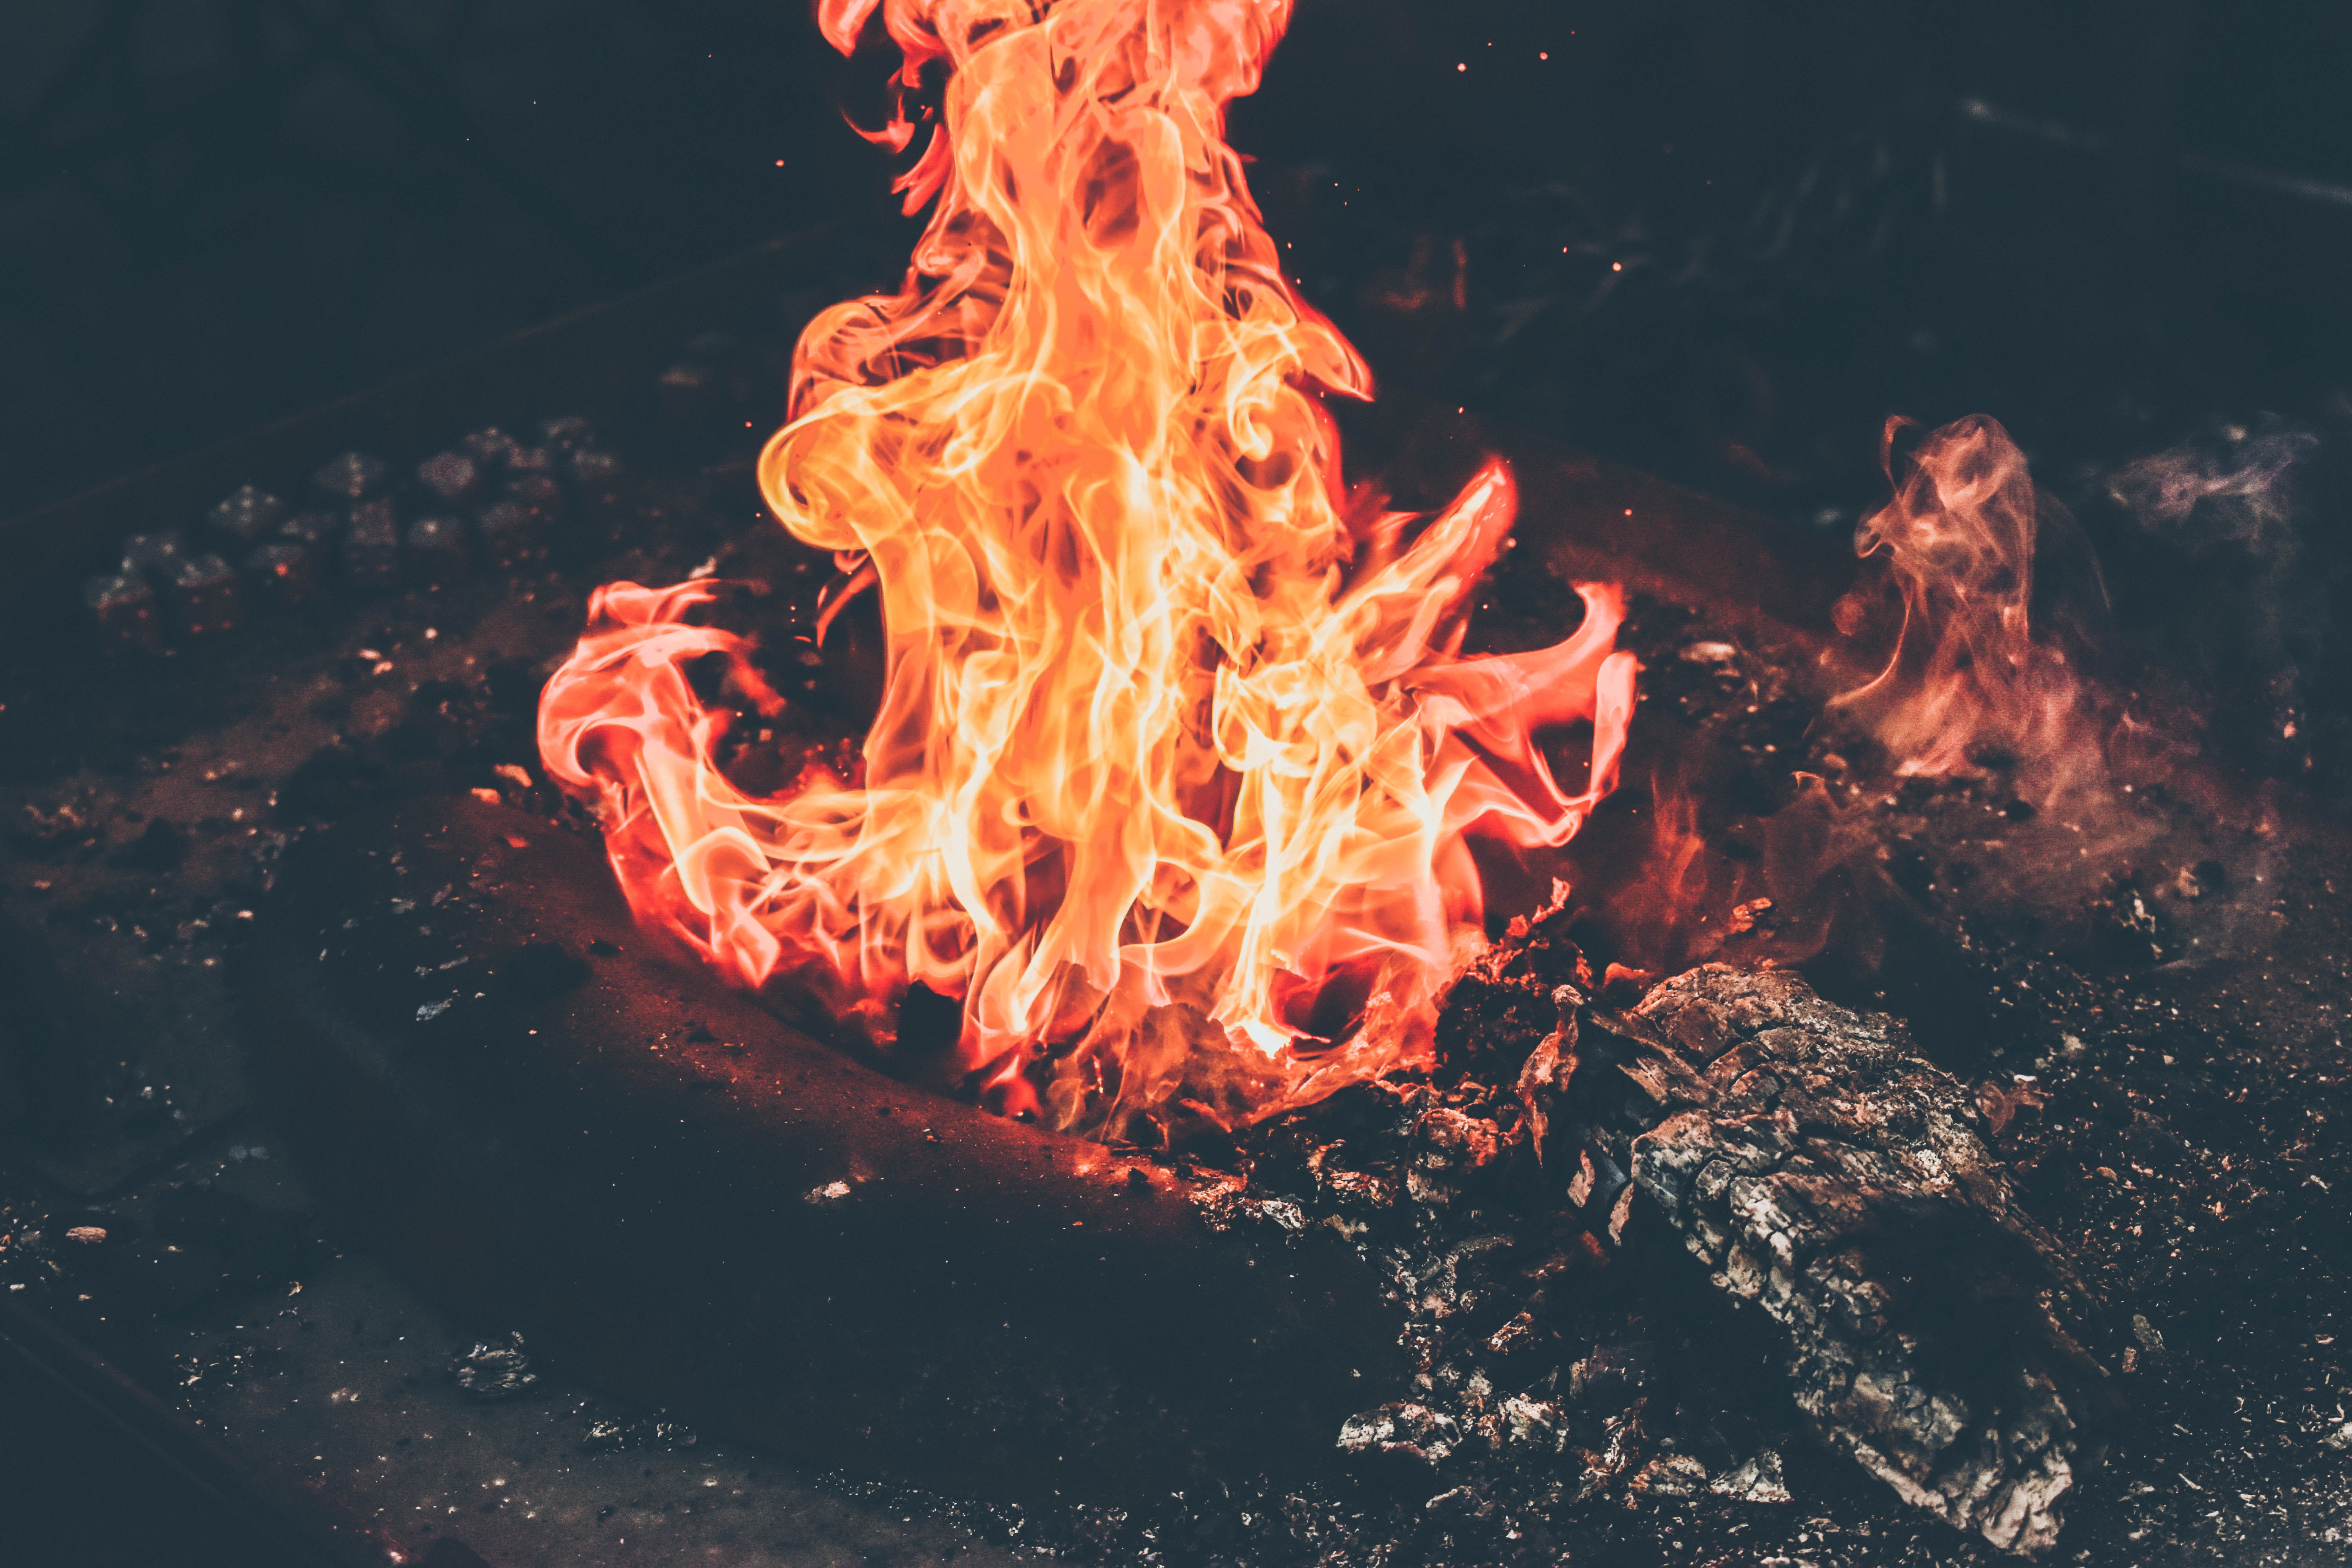 123200 download wallpaper fire, bonfire, coals, flame, miscellanea, miscellaneous, ash screensavers and pictures for free